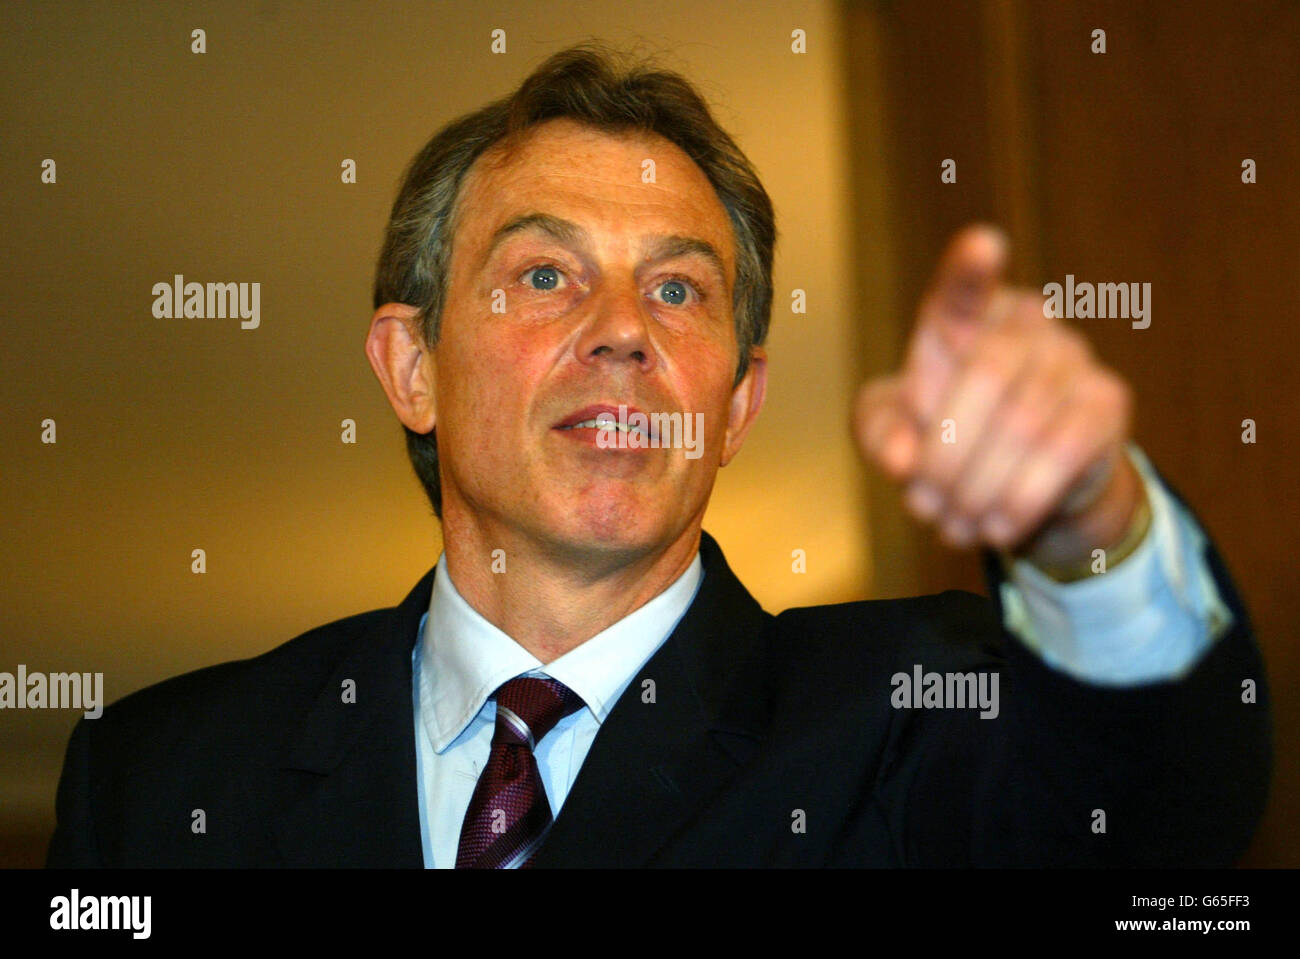 Britain's Prime Minister Tony Blair talks to the press inside London's No. 10 Downing Street, London. Blair said that the Iraqi leader Saddam Hussein can still peacefully end the standoff over weapons of mass destruction. * but warned that he will be disarmed by force if he does not. Stock Photo